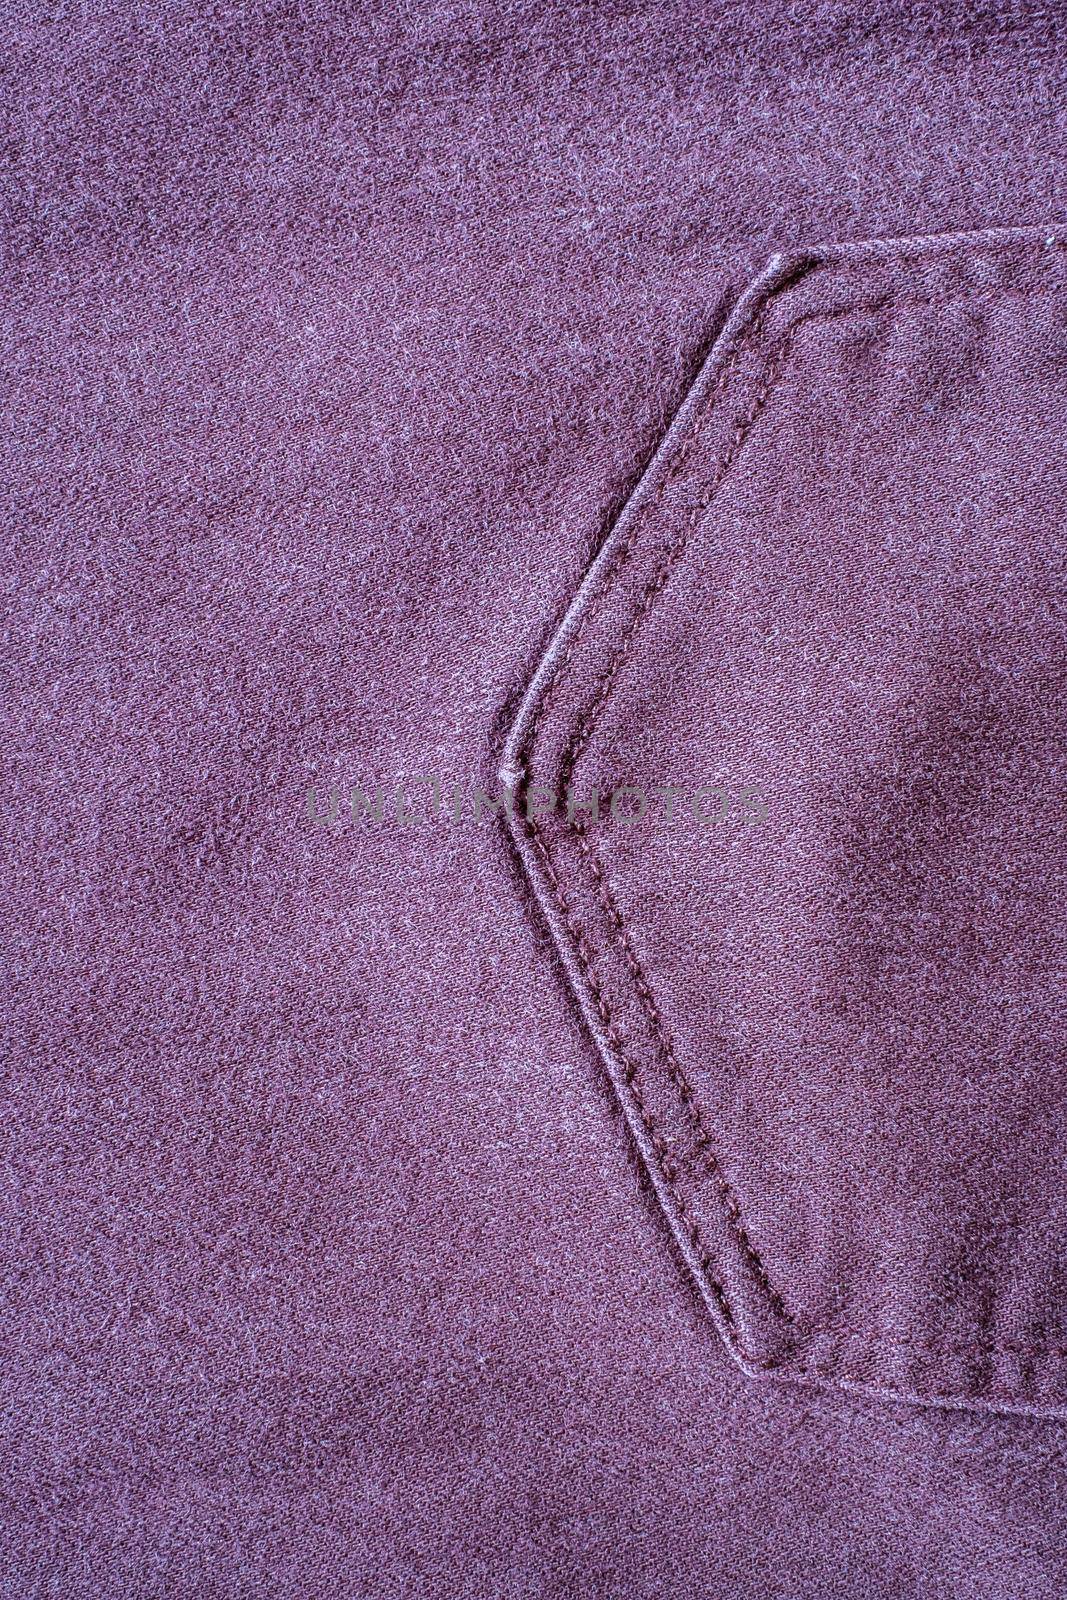 Details from jeans pants with seams and pockets by Roberto